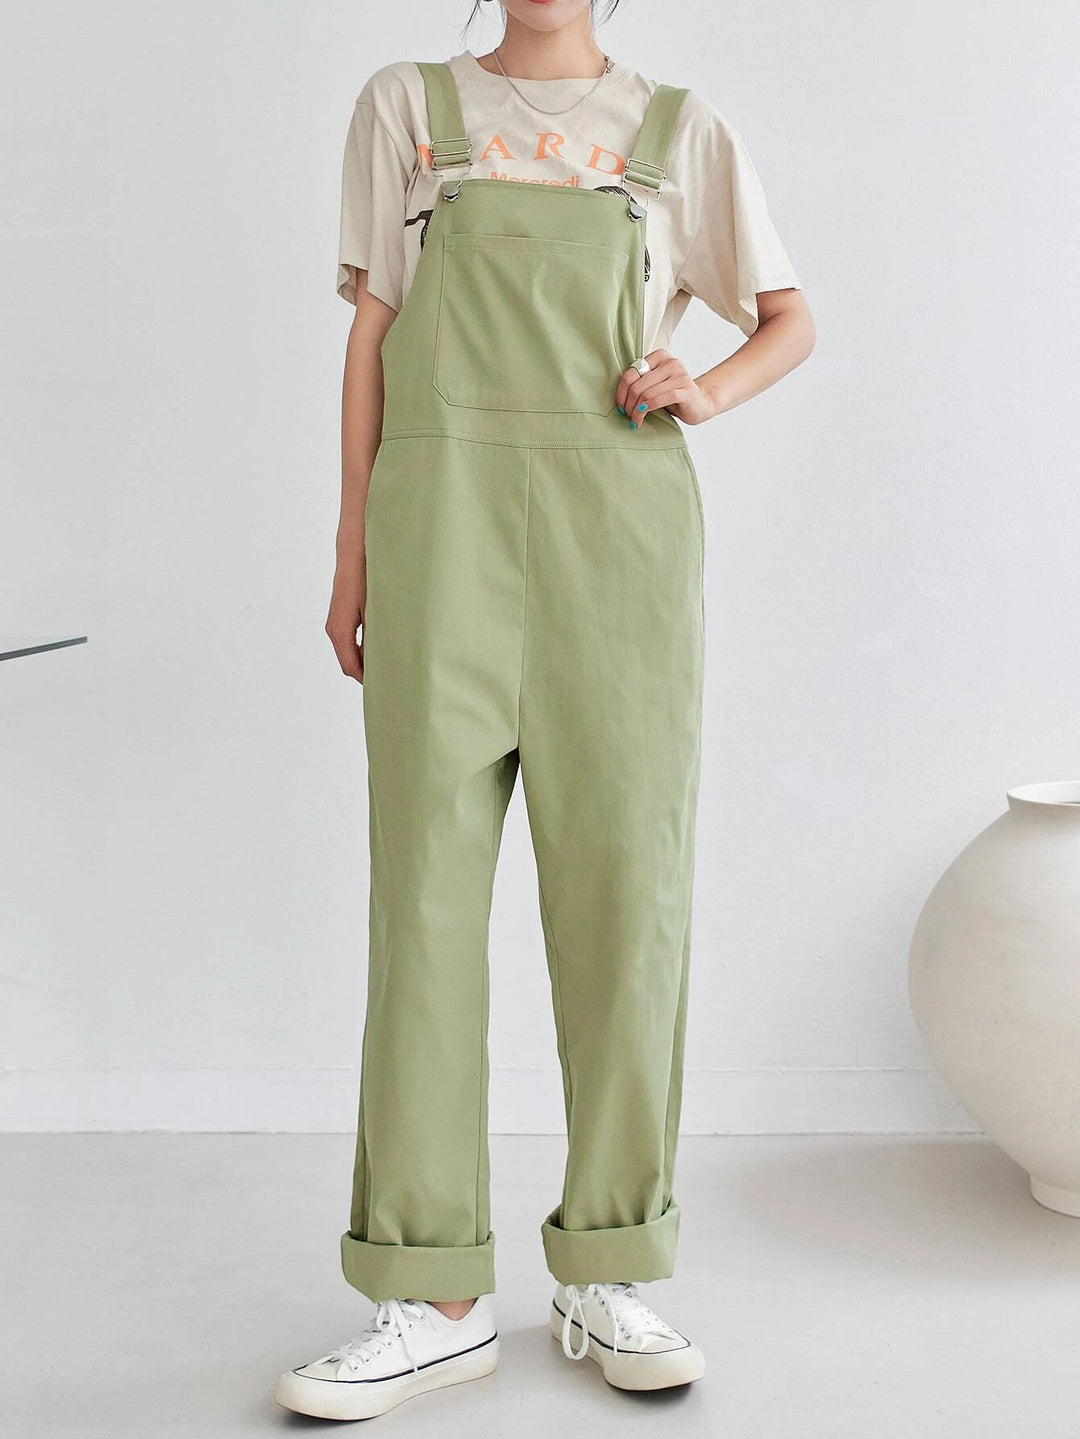 Pocket Overall Jumpsuit Without Tee